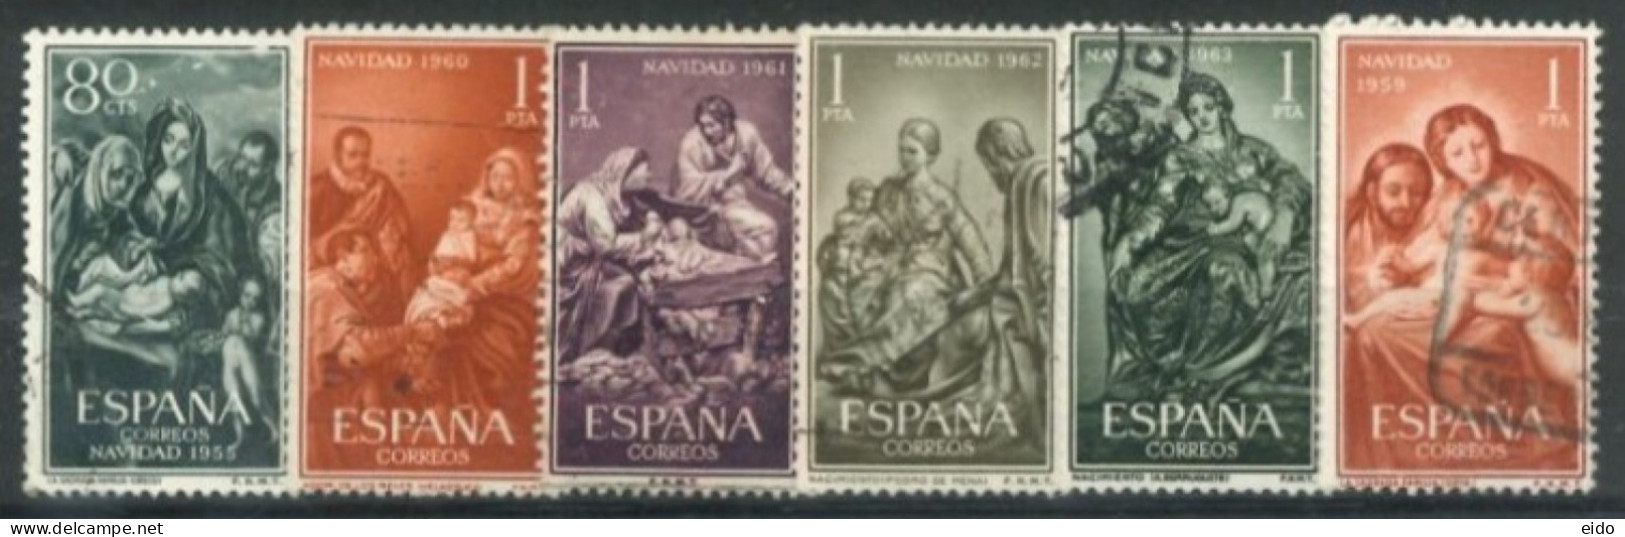 SPAIN, 1955/63, HOLY FAMILY STAMPS SET OF 6, USED. - Gebruikt